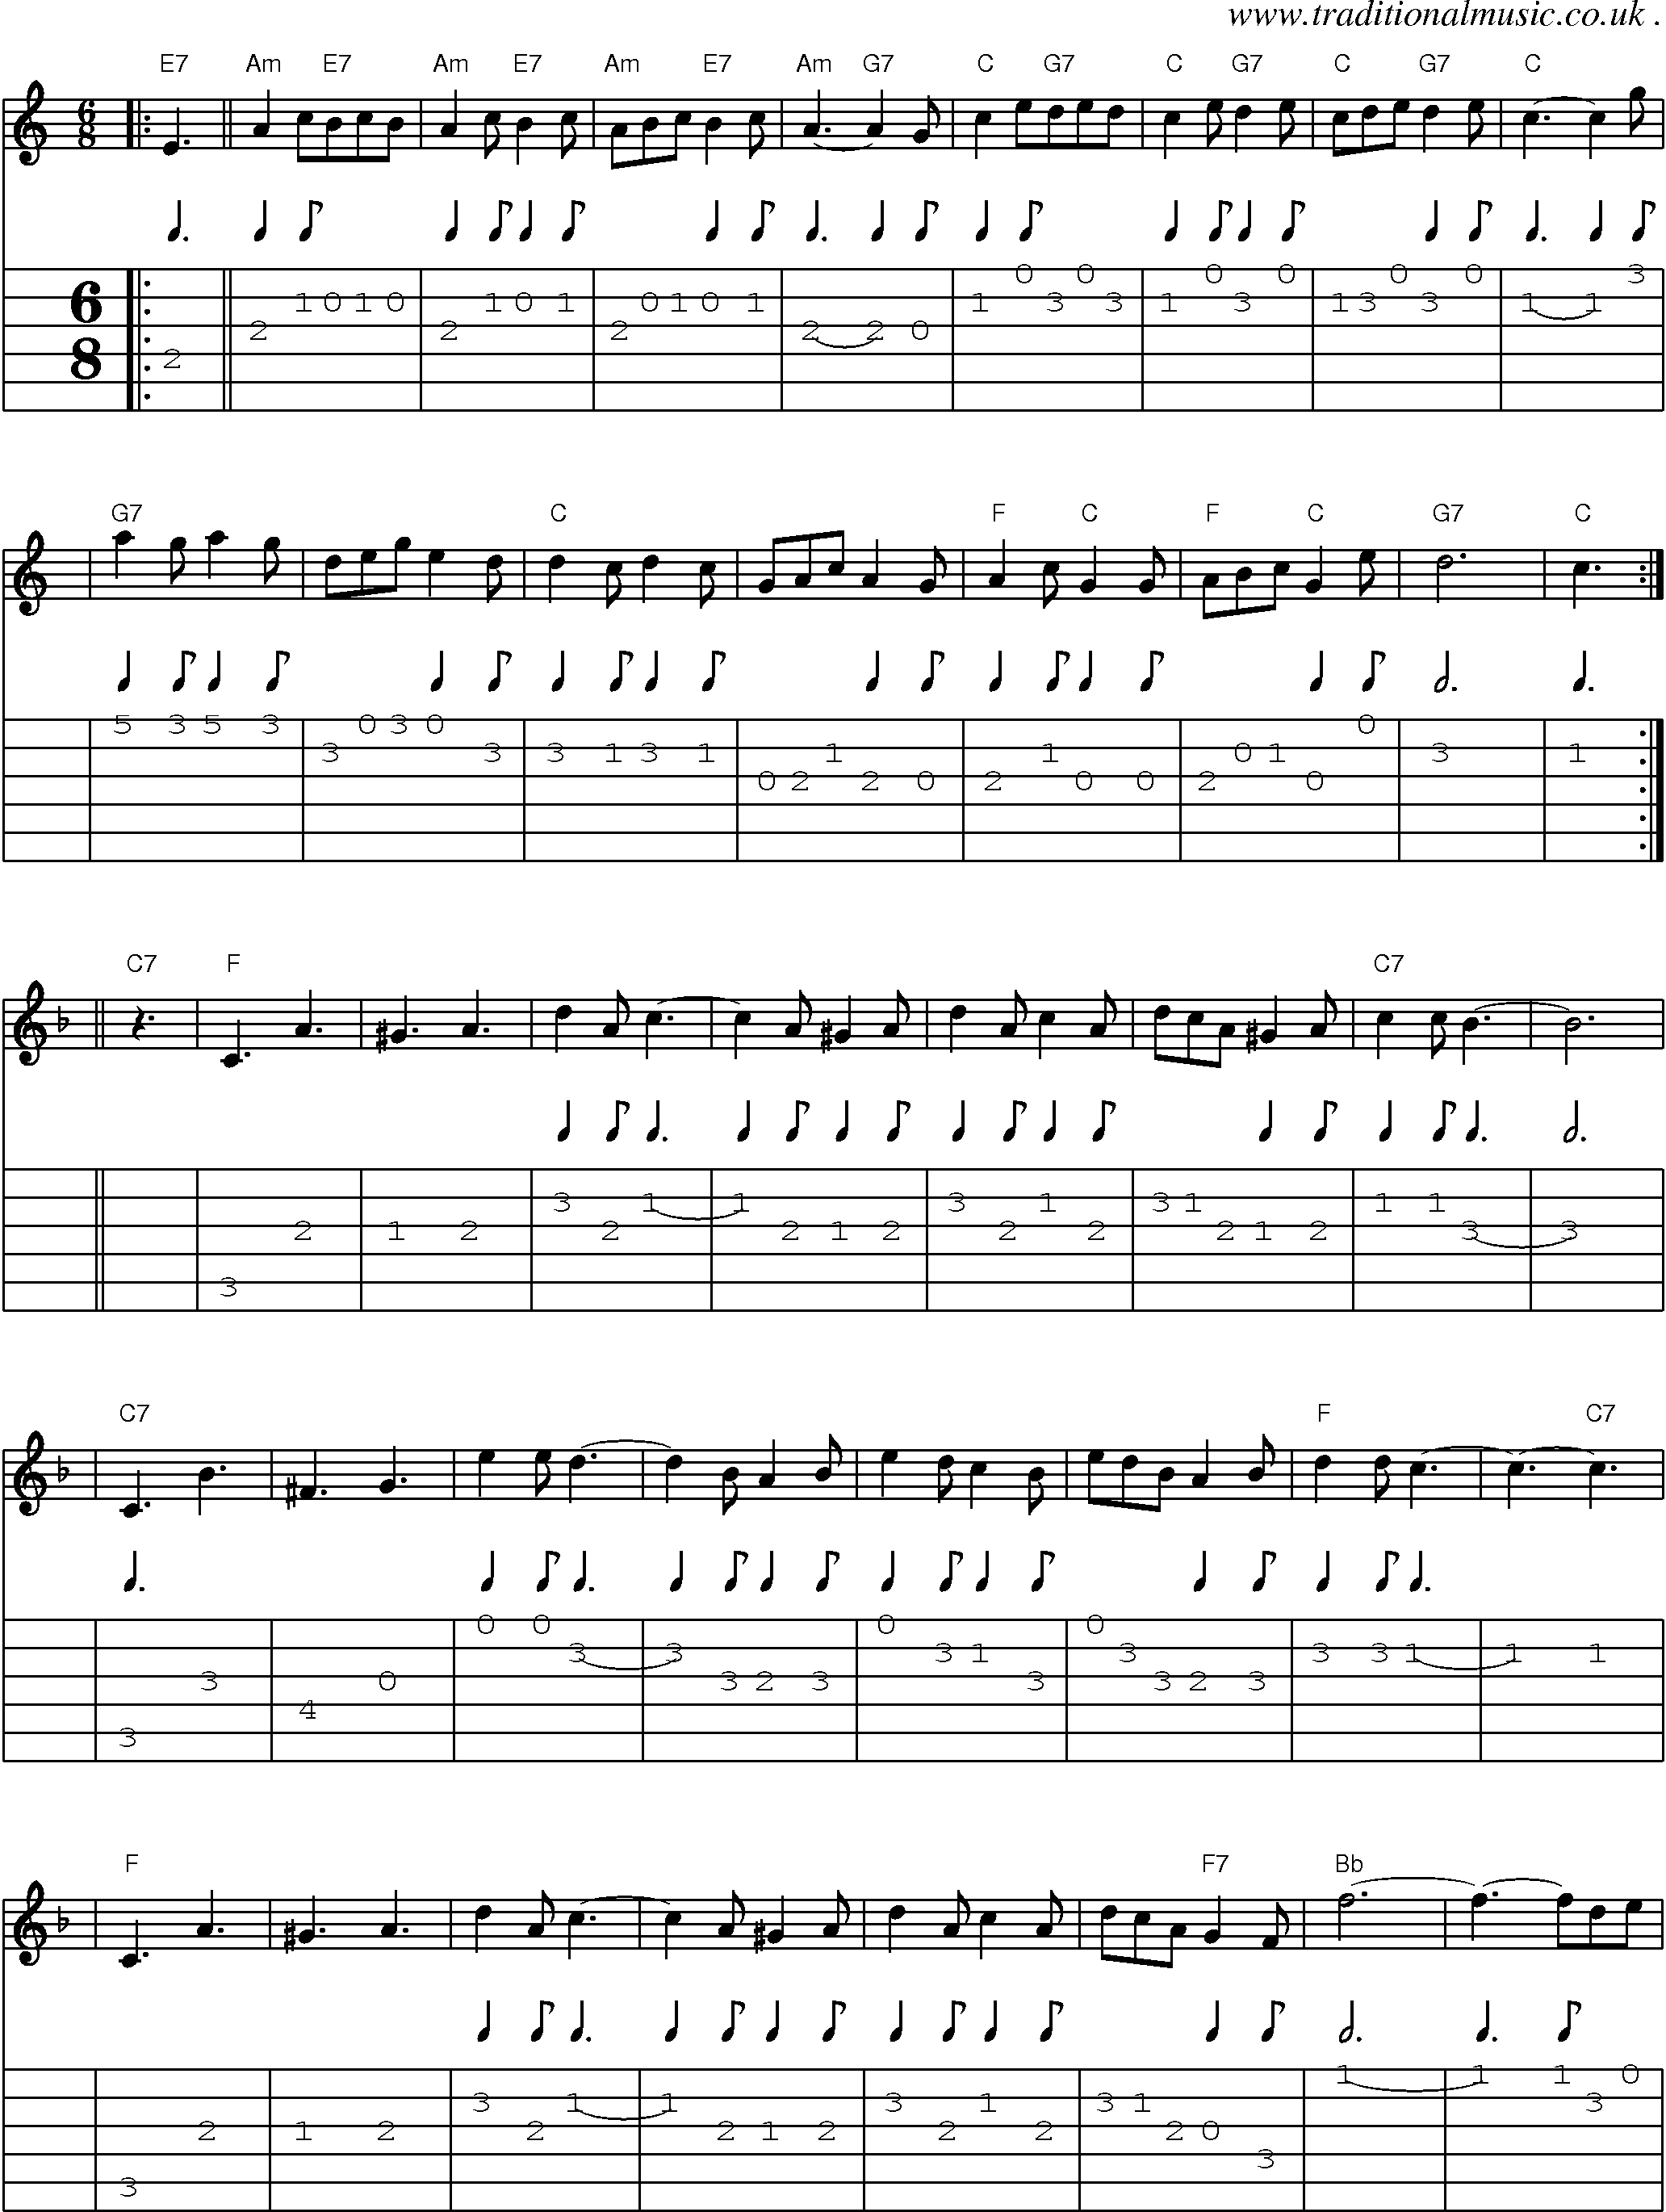 Sheet-Music and Guitar Tabs for The Teetotaler